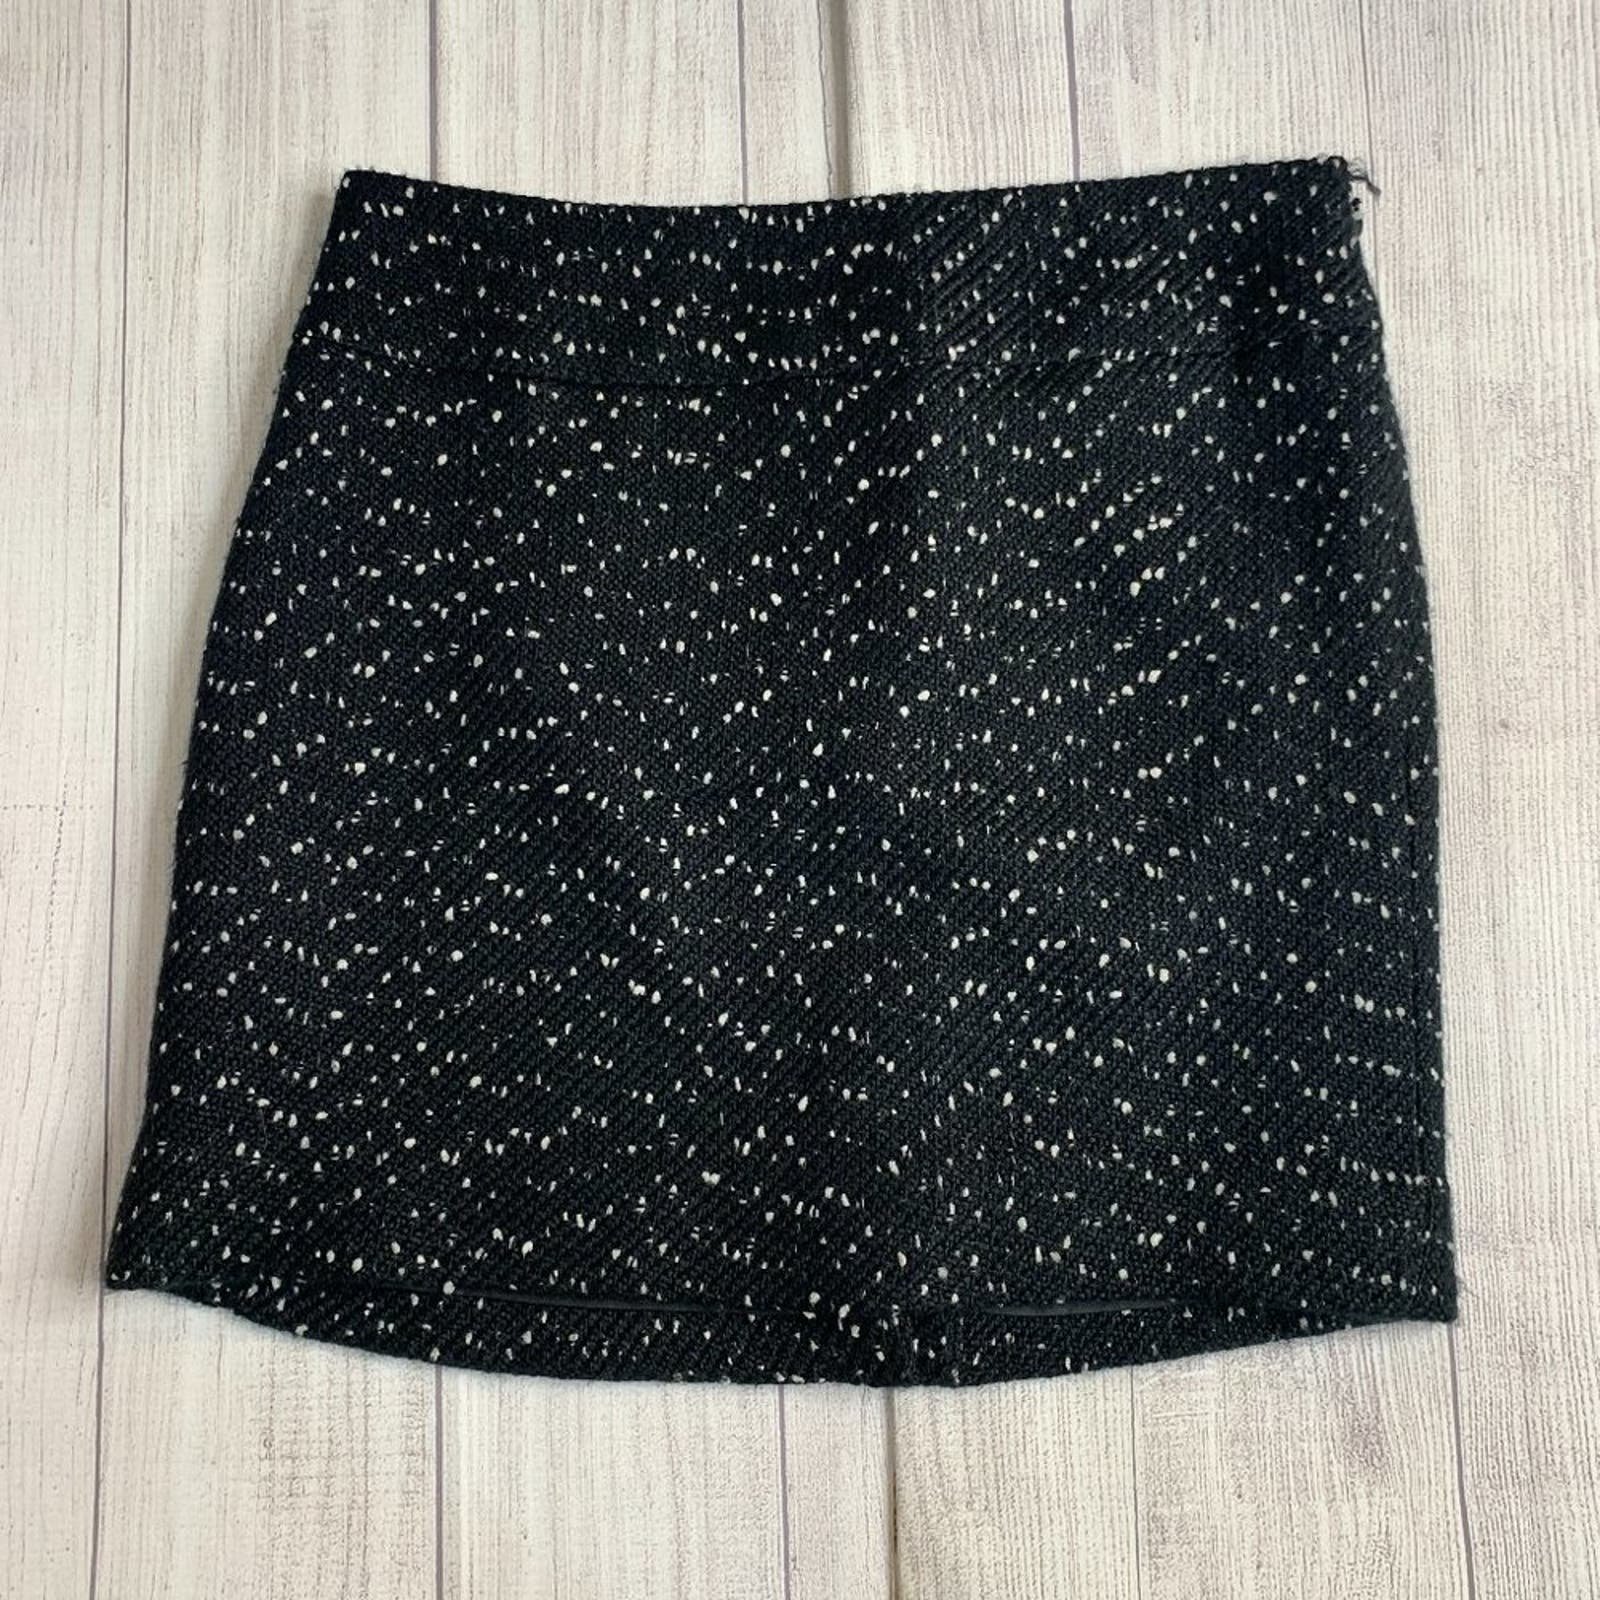 Cheap The Limited Black and White Tweed Mini Skirt Size